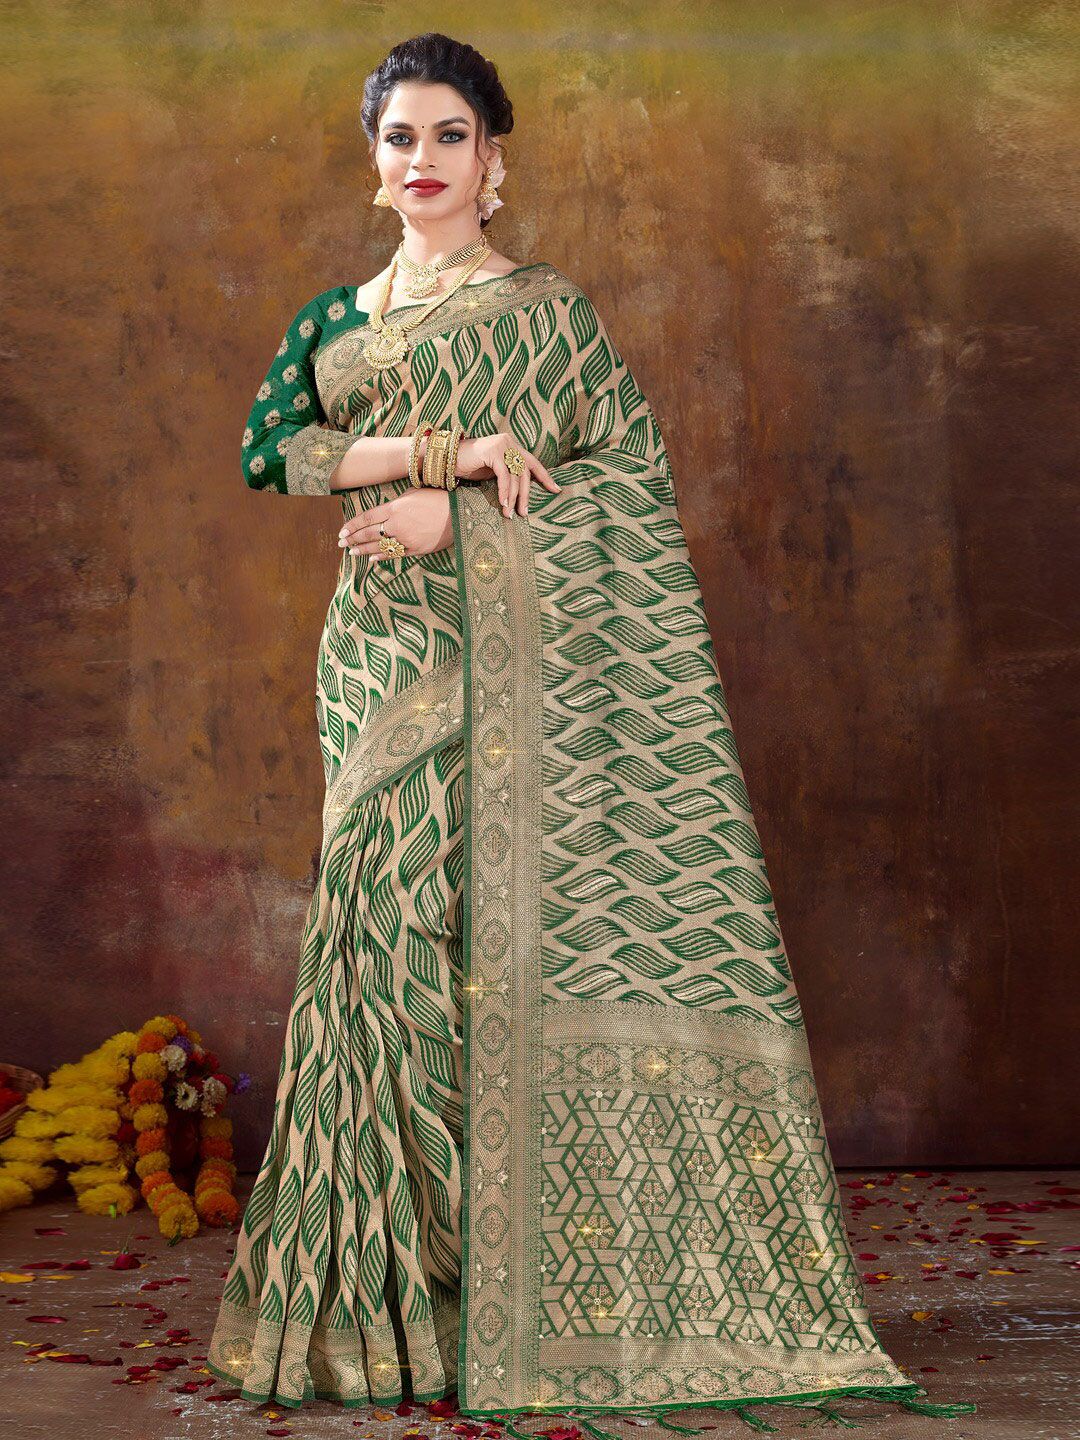 SANGAM PRINTS Green & Gold-Toned Woven Design Beads and Stones Organza Saree Price in India